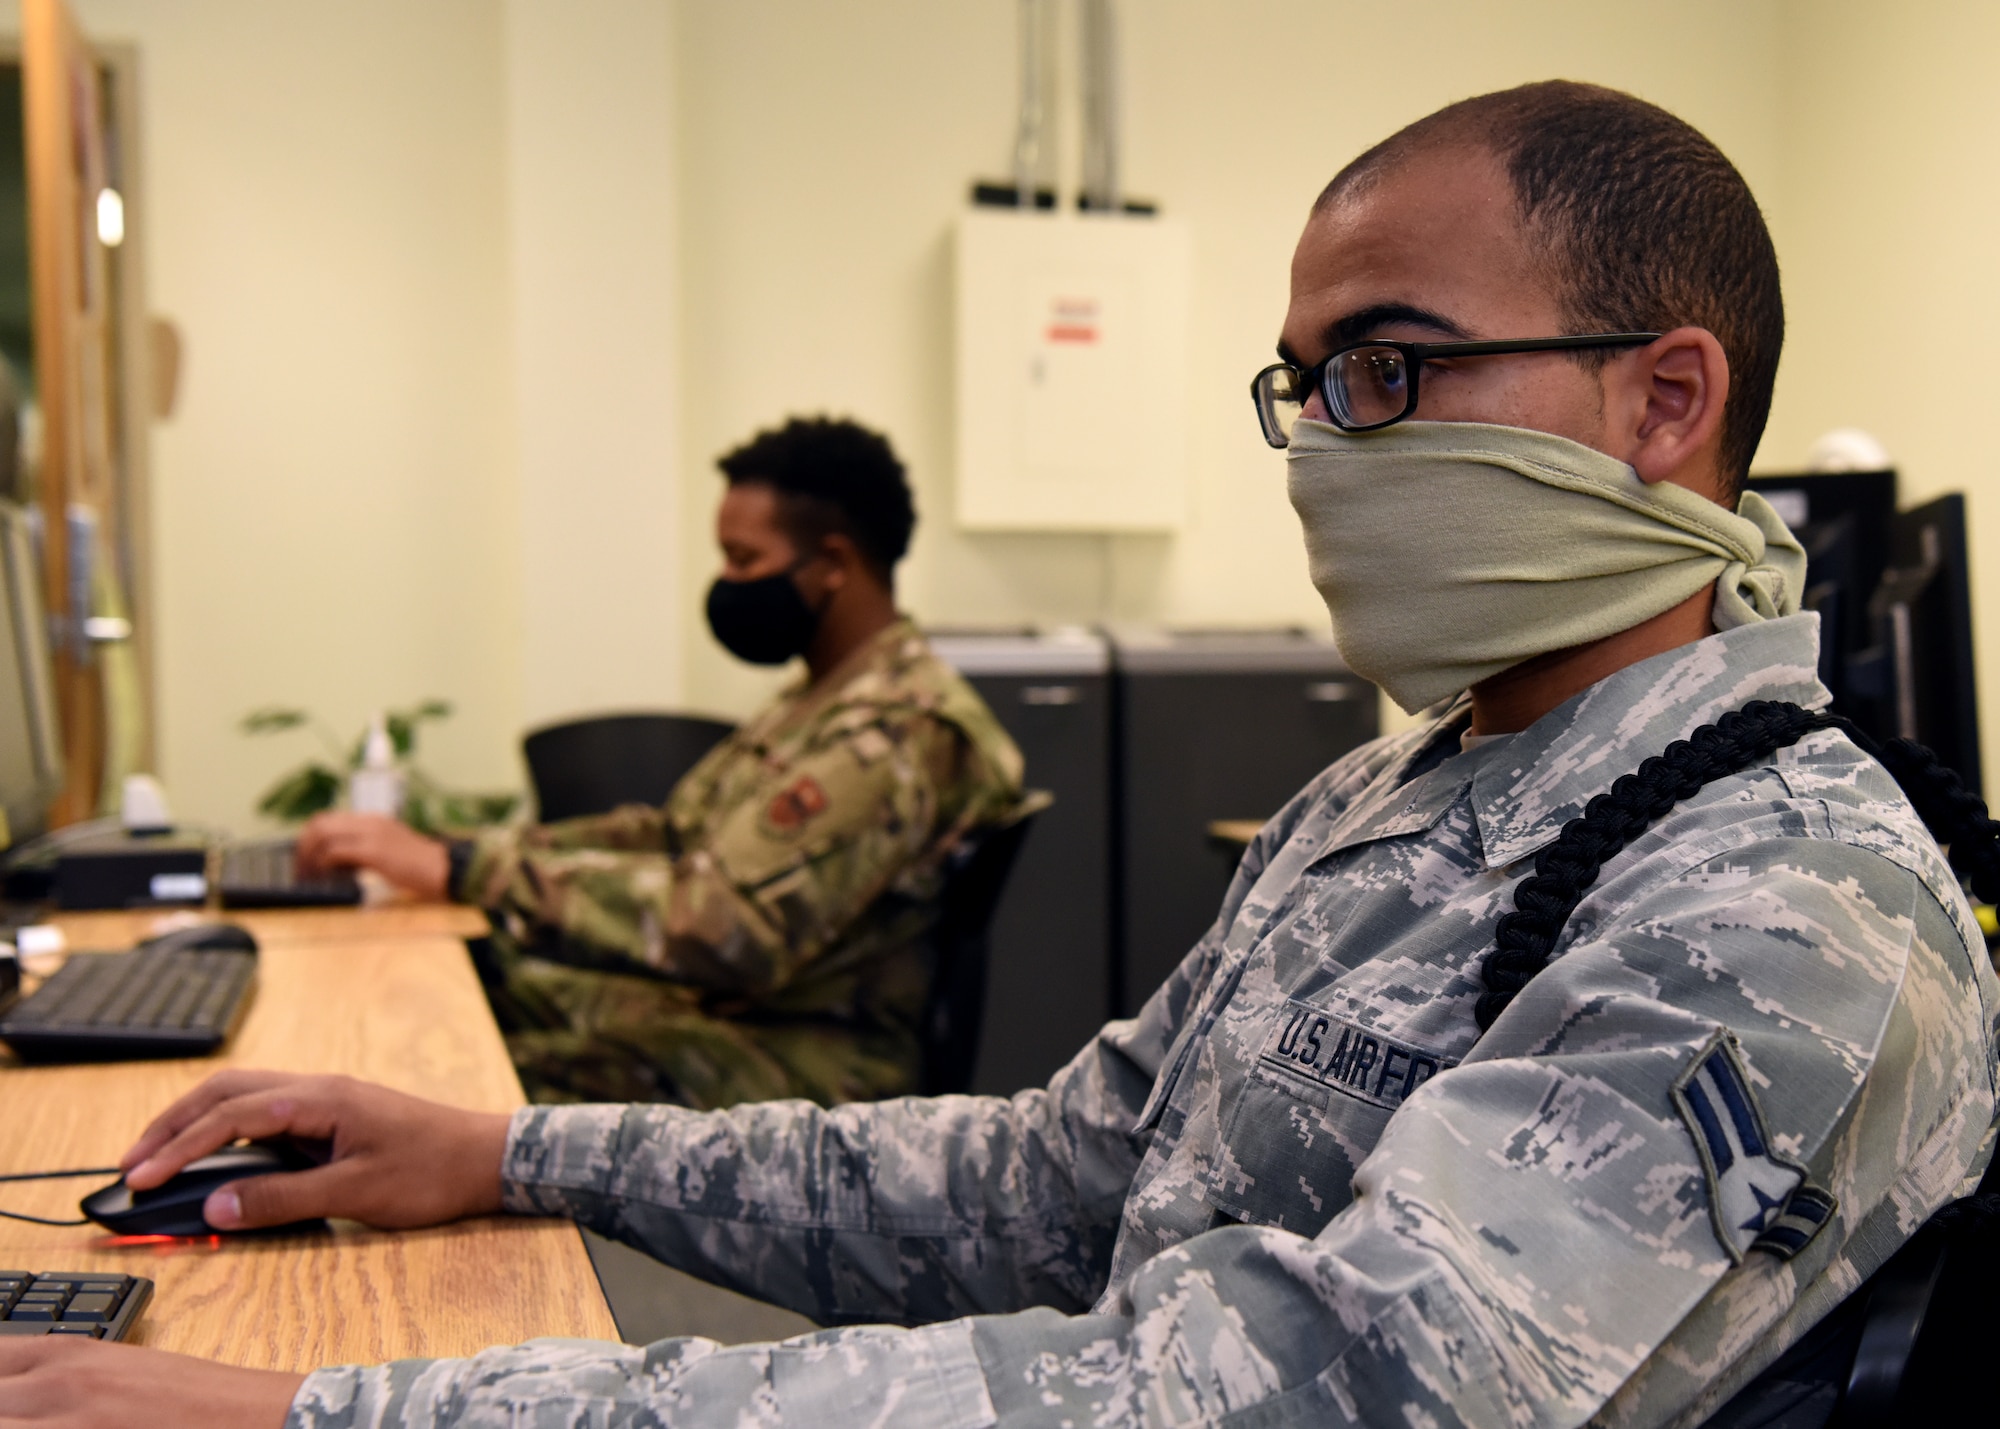 U.S. Air Force Airman 1st Class Quanah Roberts, 316th Training Squadron student, social distances and wears a mask while attending the in-classroom portion of his Apprentice Electronic Signals Intelligence Analyst (1N2A) course inside Fred Sebers Hall on Goodfellow Air Force Base, Texas, April 20, 2020. The course was the first-level training for Electromagnetic Spectrum Theory and Radar Theory, with two-thirds of its material taught through distance learning. (U.S. Air Force Photo by Airman 1st Class Abbey Rieves)